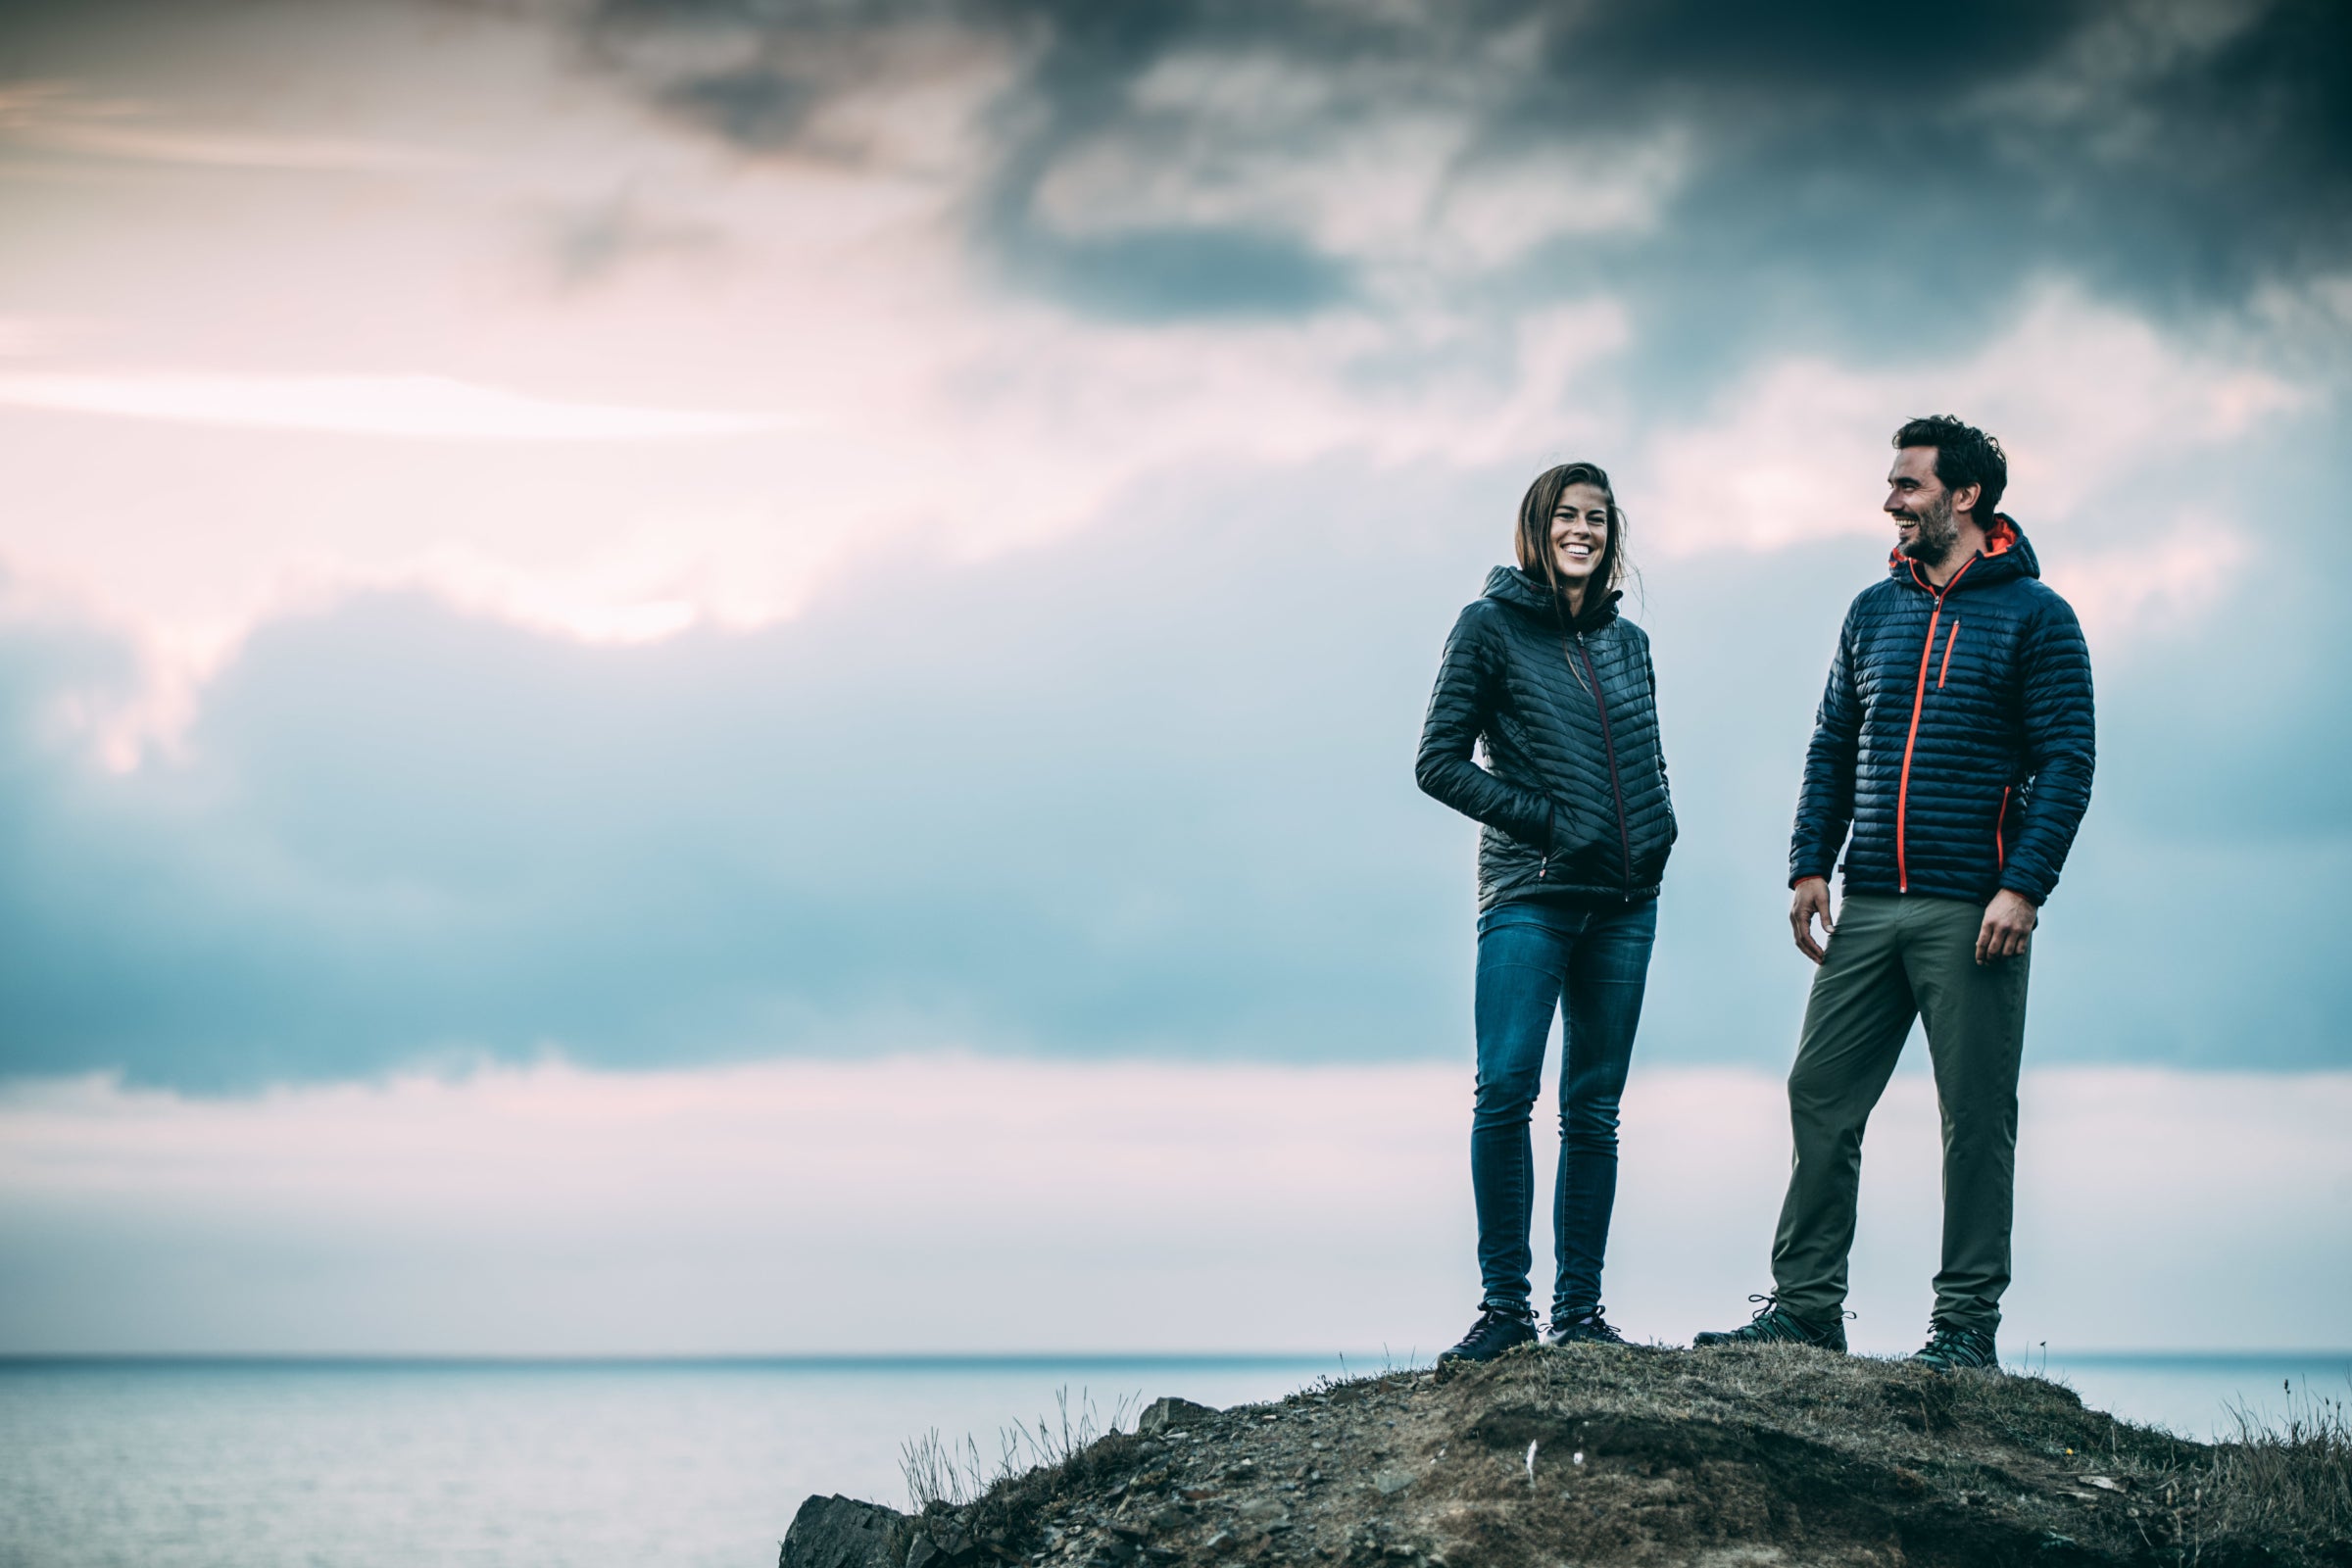 A man and a woman smiling at each other on a rocky hilltop, with a cloudy sky at sunset in the background, both wearing Isobaa merino insulated jackets